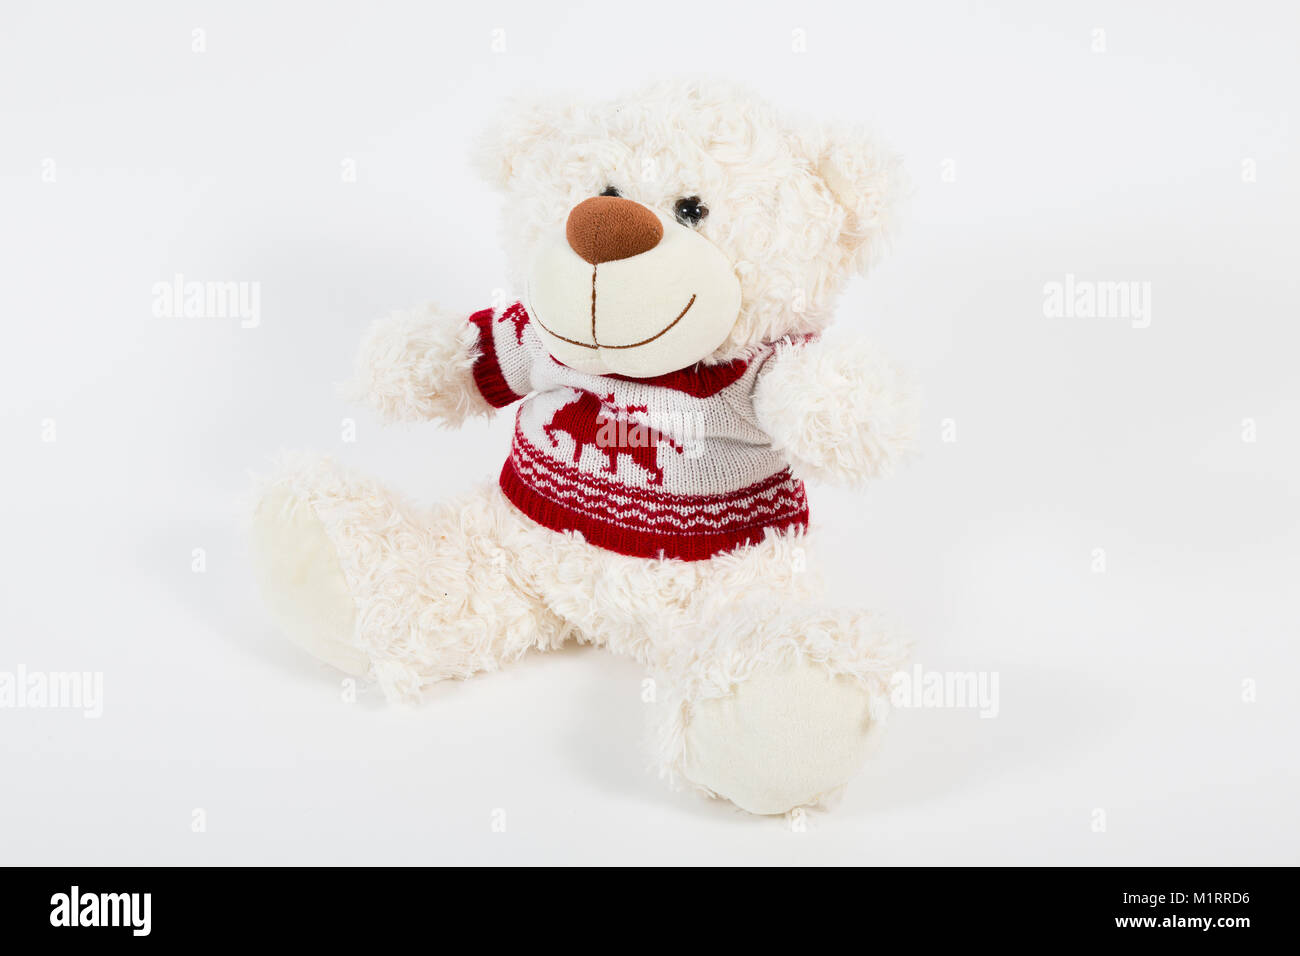 London, UK. Stuffed child's teddy bear wearing white and red knitted jumper. Stock Photo